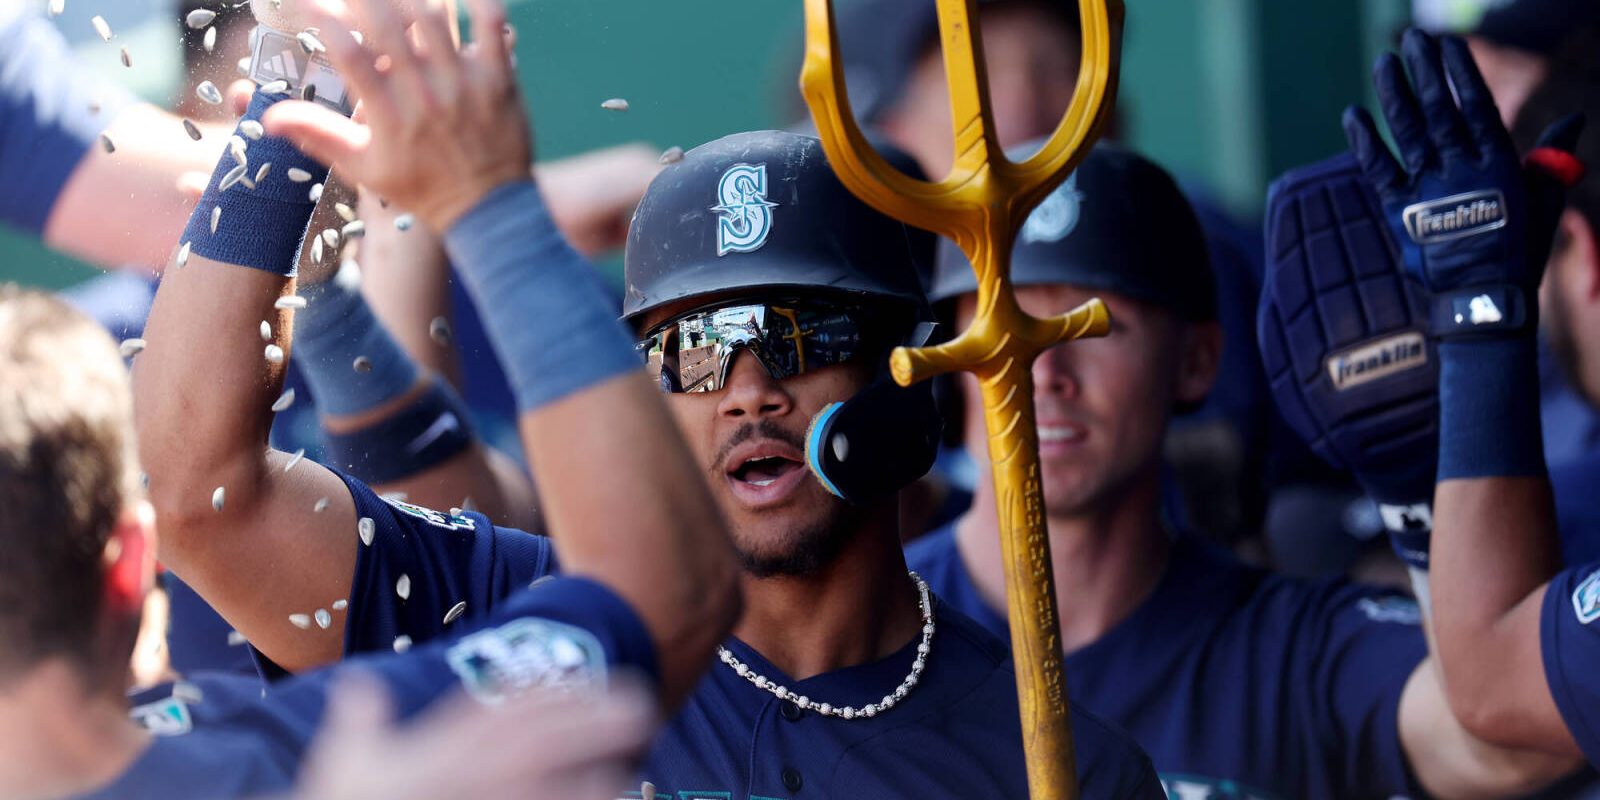 KANSAS CITY, MISSOURI - AUGUST 17:  Julio Rodriguez #44 of the Seattle Mariners is congratulated by teammates in the dugout after hitting a 3-run home run during the 8th inning of the game against the Kansas City Royals at Kauffman Stadium on August 17, 2023 in Kansas City, Missouri. (Photo by Jamie Squire/Getty Images)